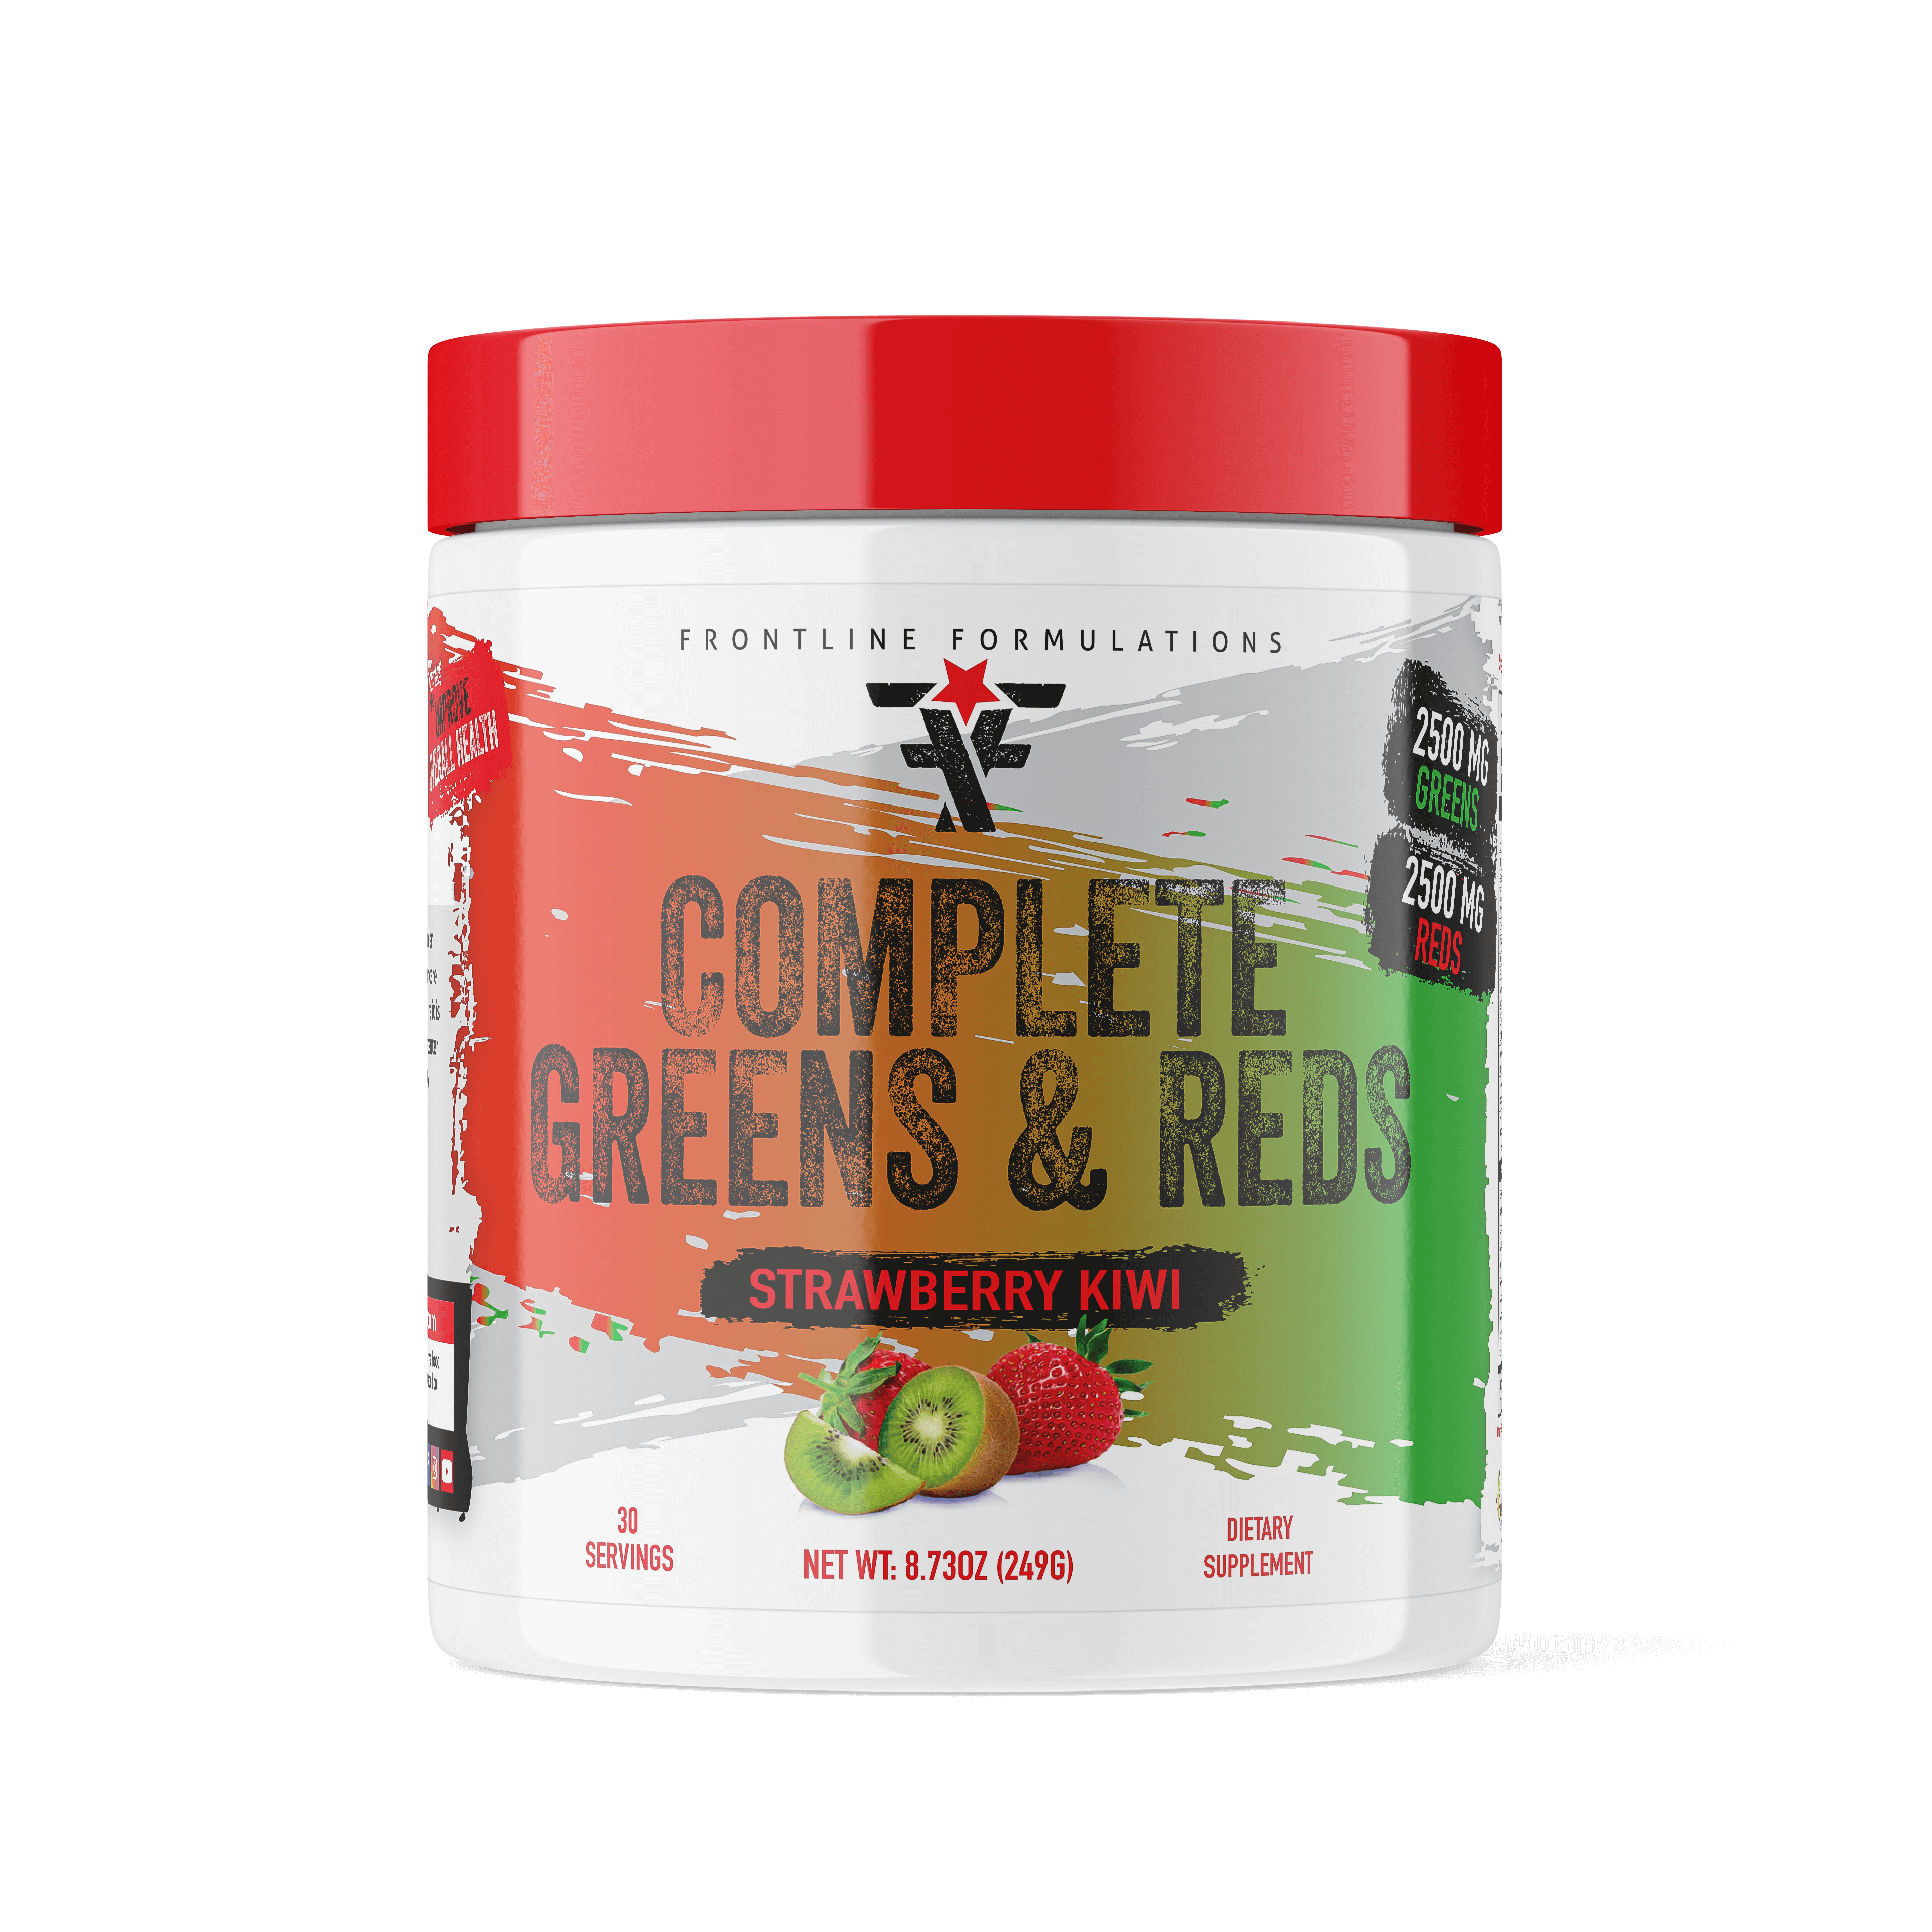 Complete Greens & Reds Reds and Greens Reds and greens supplements are nutrient-rich powders or capsules containing a variety of fruits, vegetables, herbs, and other plant-based ingredients. These supplements aim to provide a concentrated source of vitami